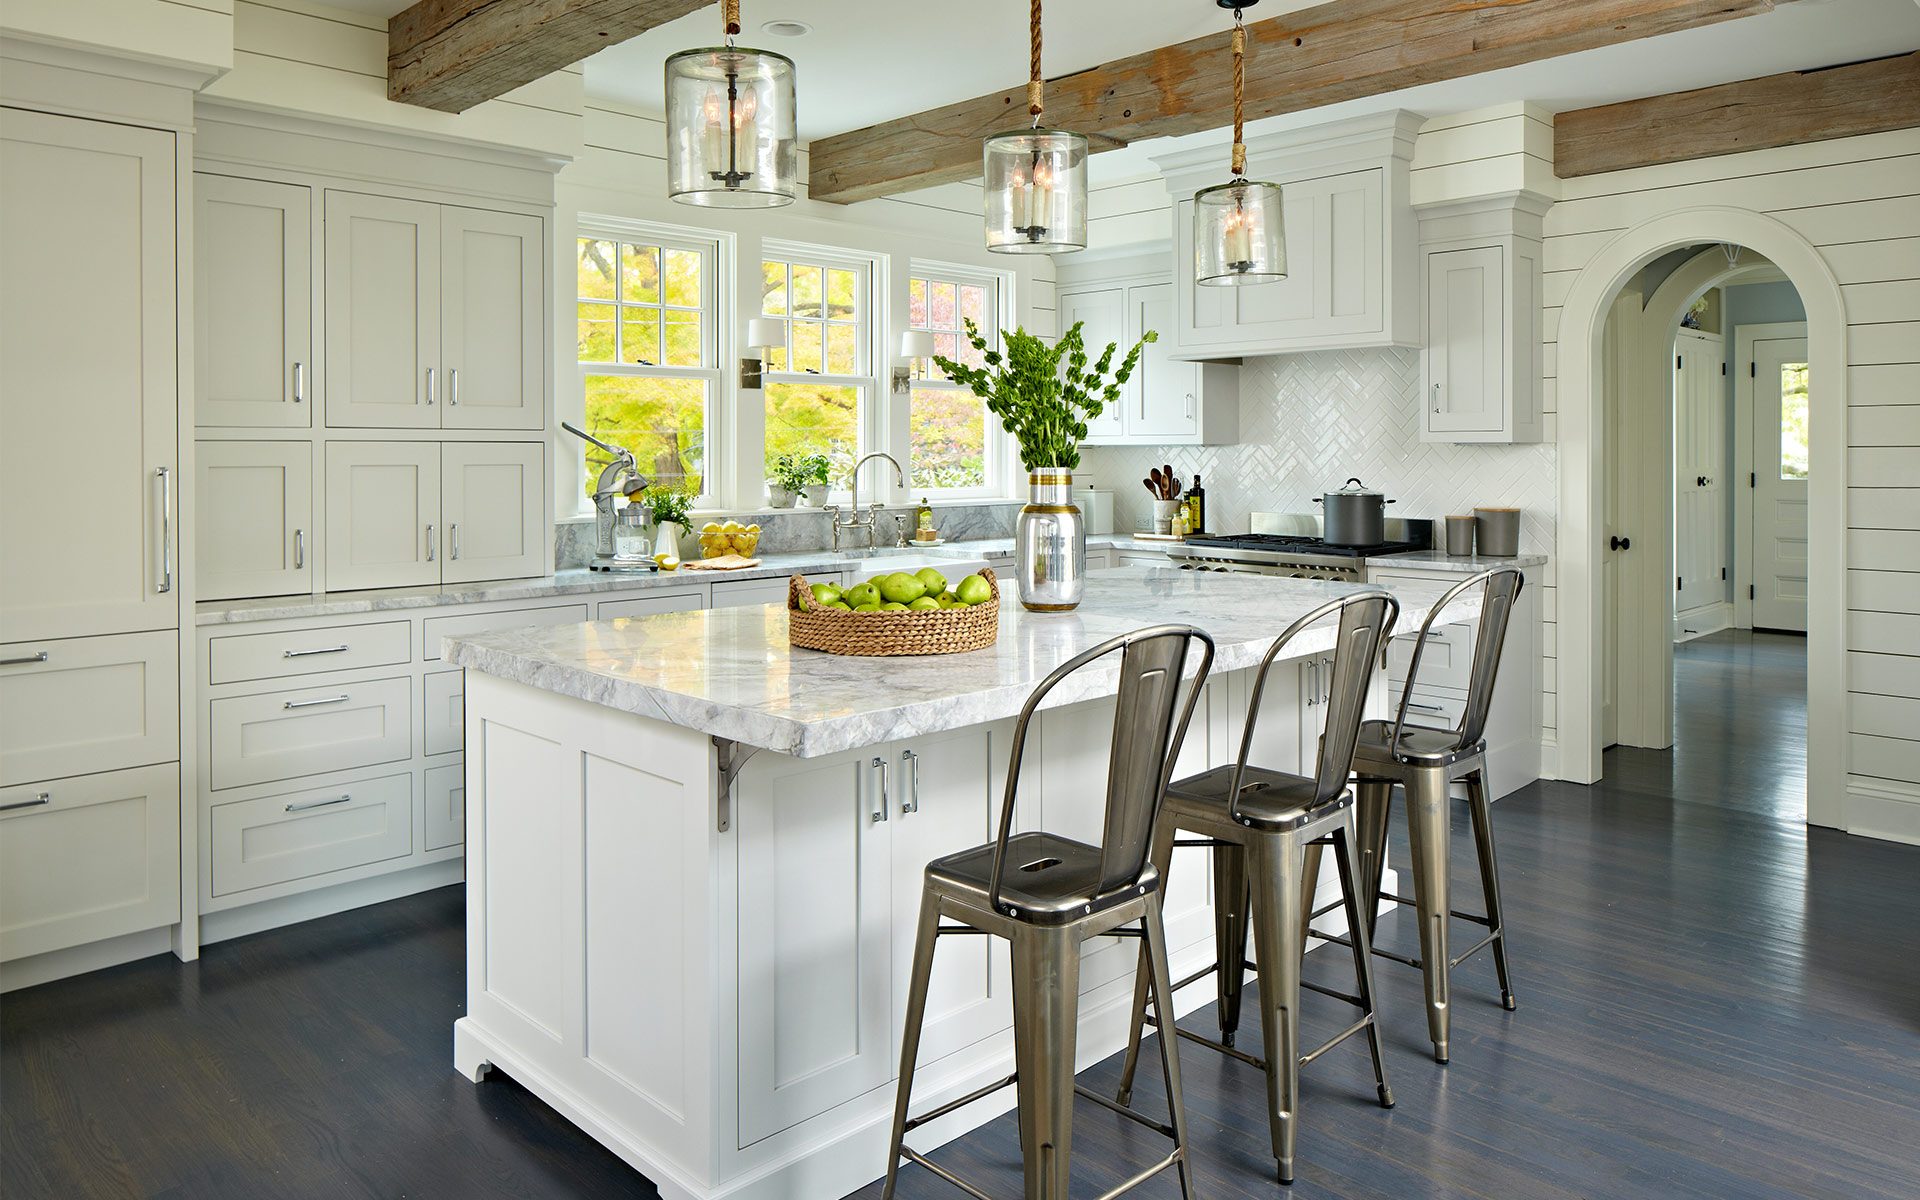 Contemporary kitchen designed by DEANE inc with custom cabinetry, custom countertops, wooden beams, and modern accents.